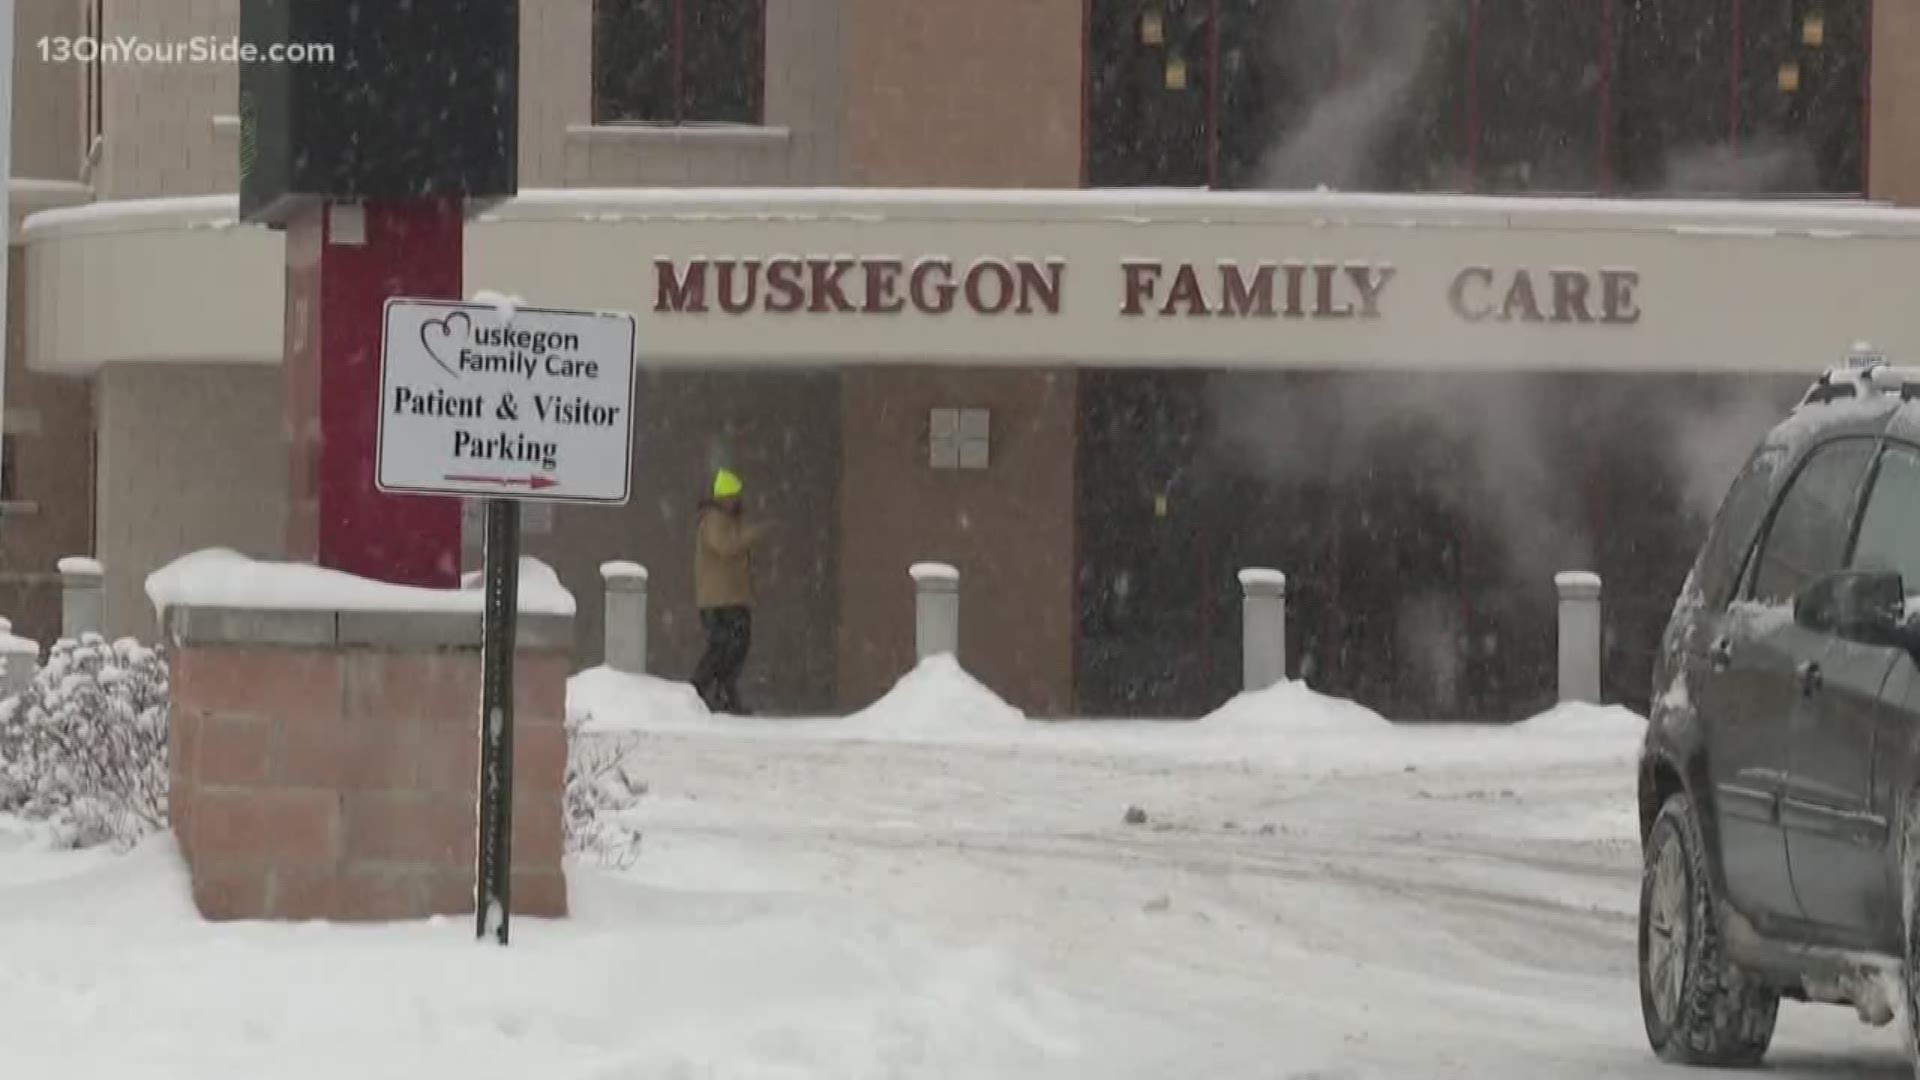 Muskegon Family Care suddenly ended operations. The healthcare facility treats about 20,000 patients.